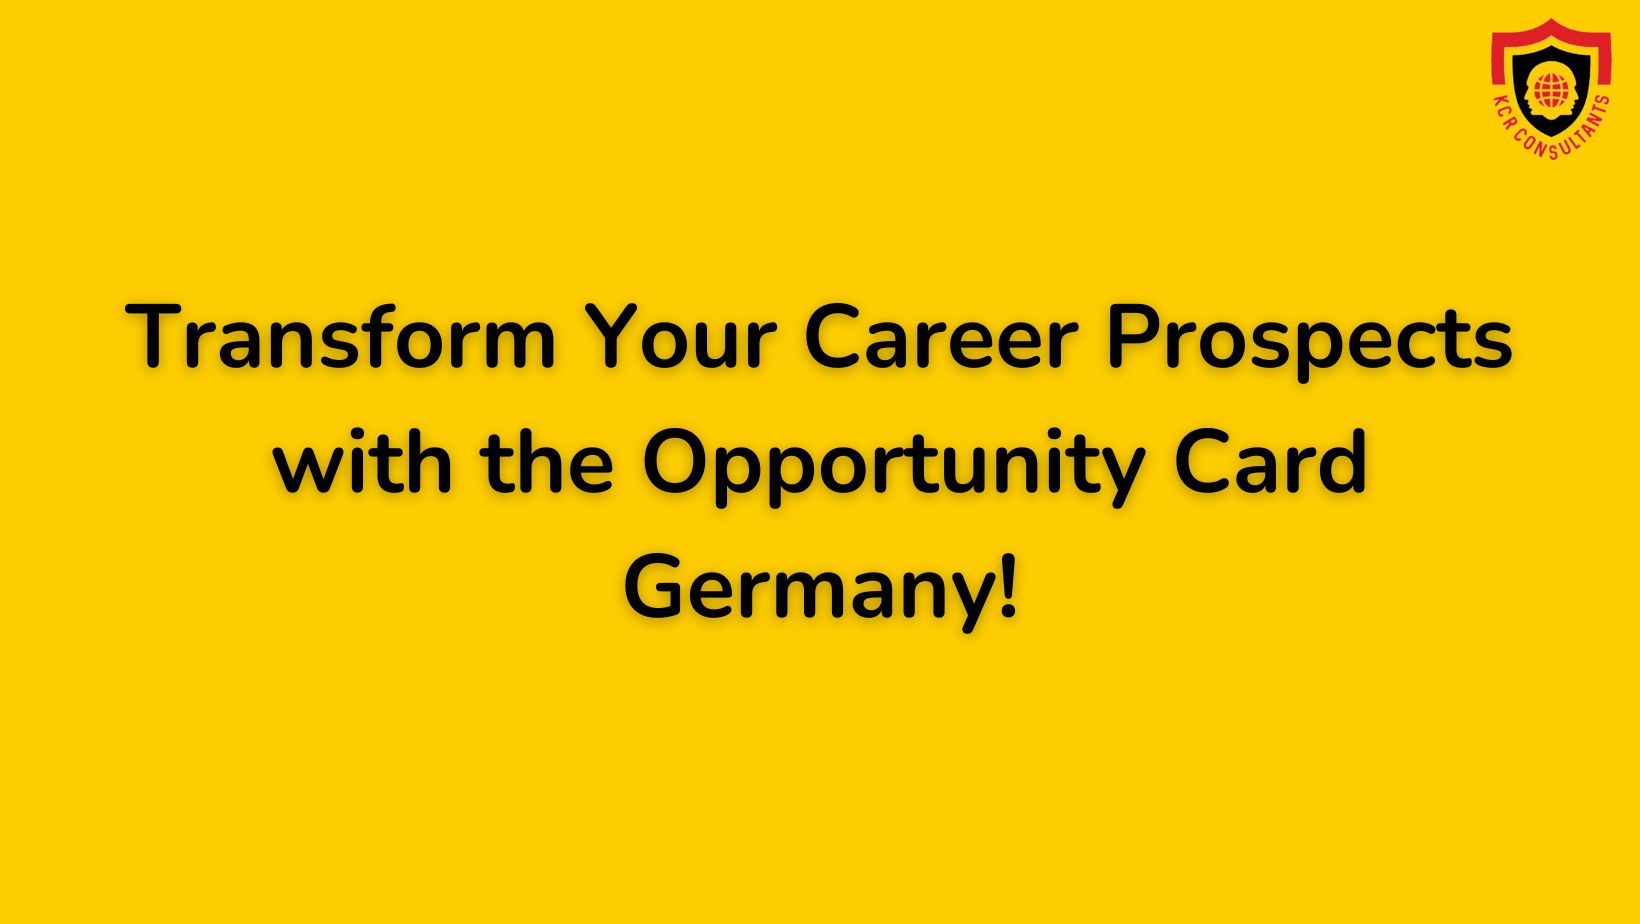 Opportunity Card Germany - kcr consultants - Career opportunities in germany